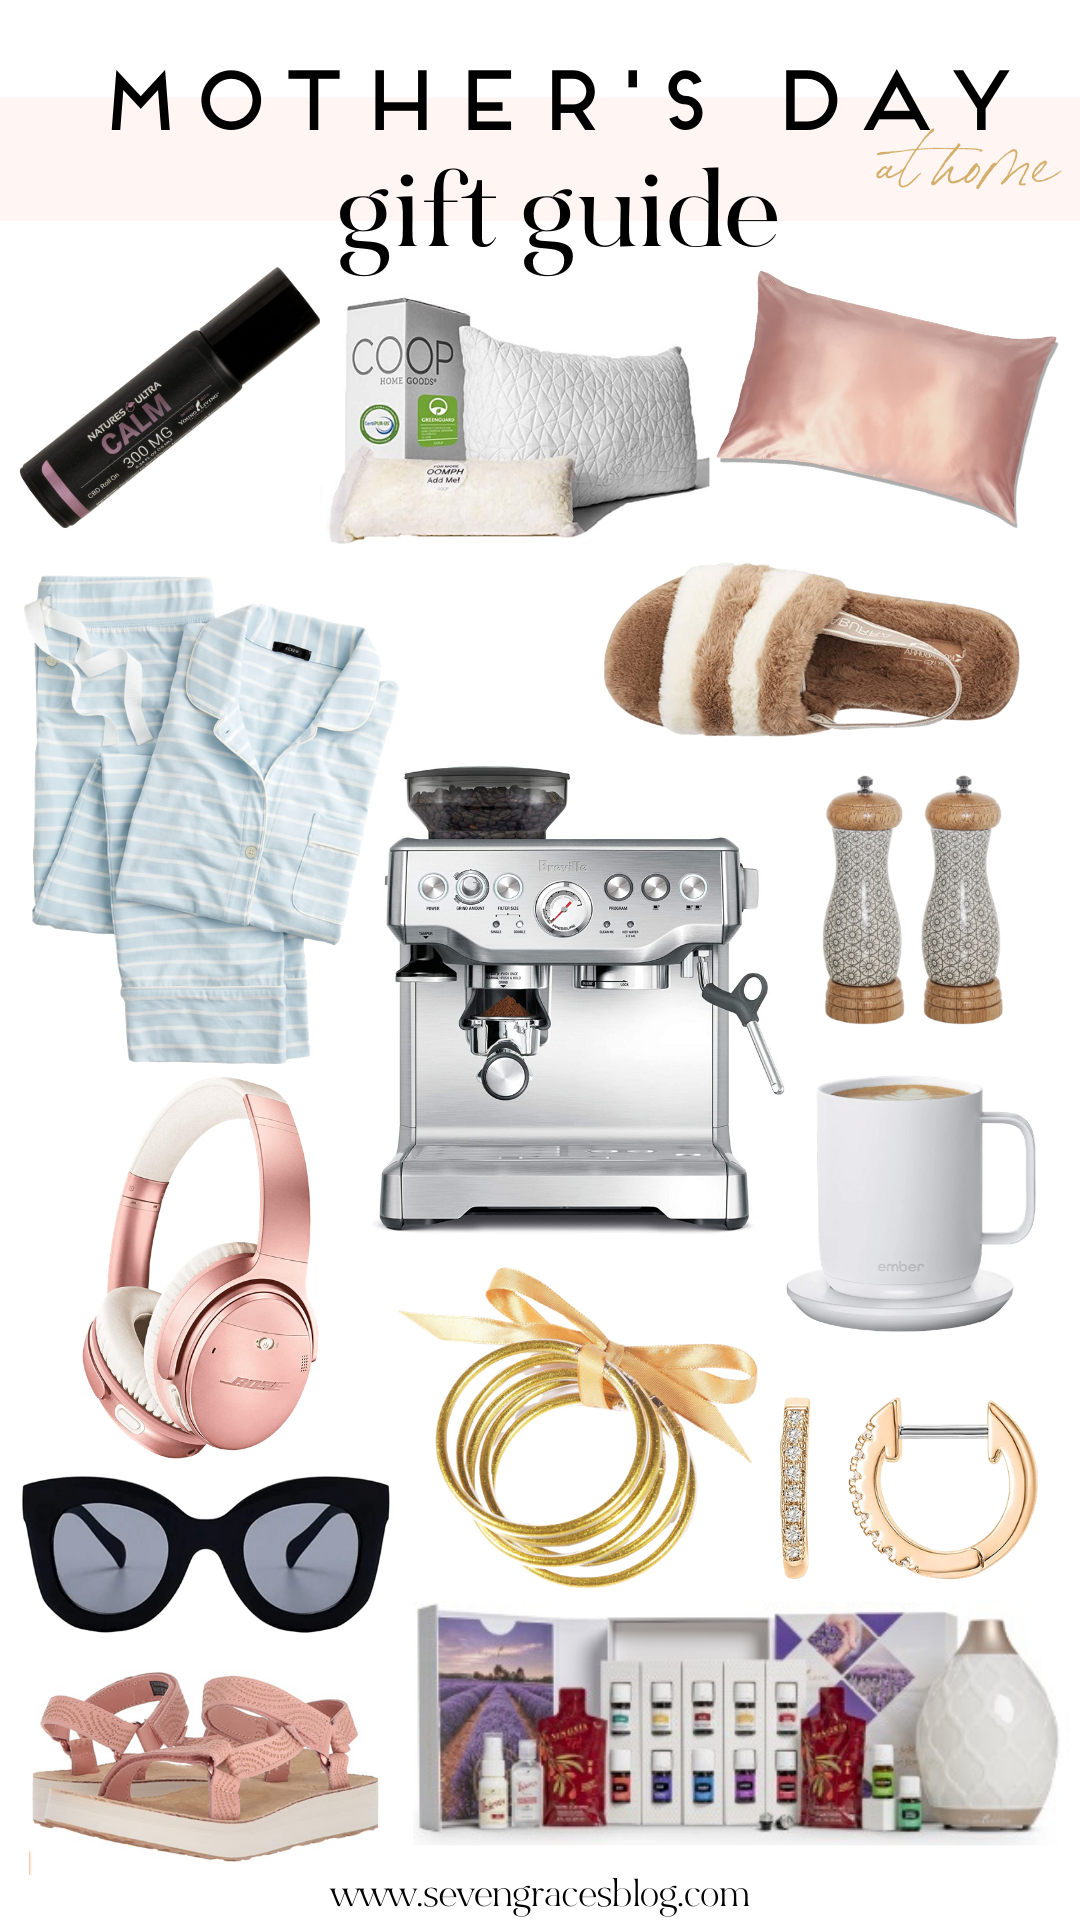 The ultimate Mother's Day At Home Gift Guide. All the best splurges and spend-thrifty finds, to calm you, caffeinate you, and keep you cozy.